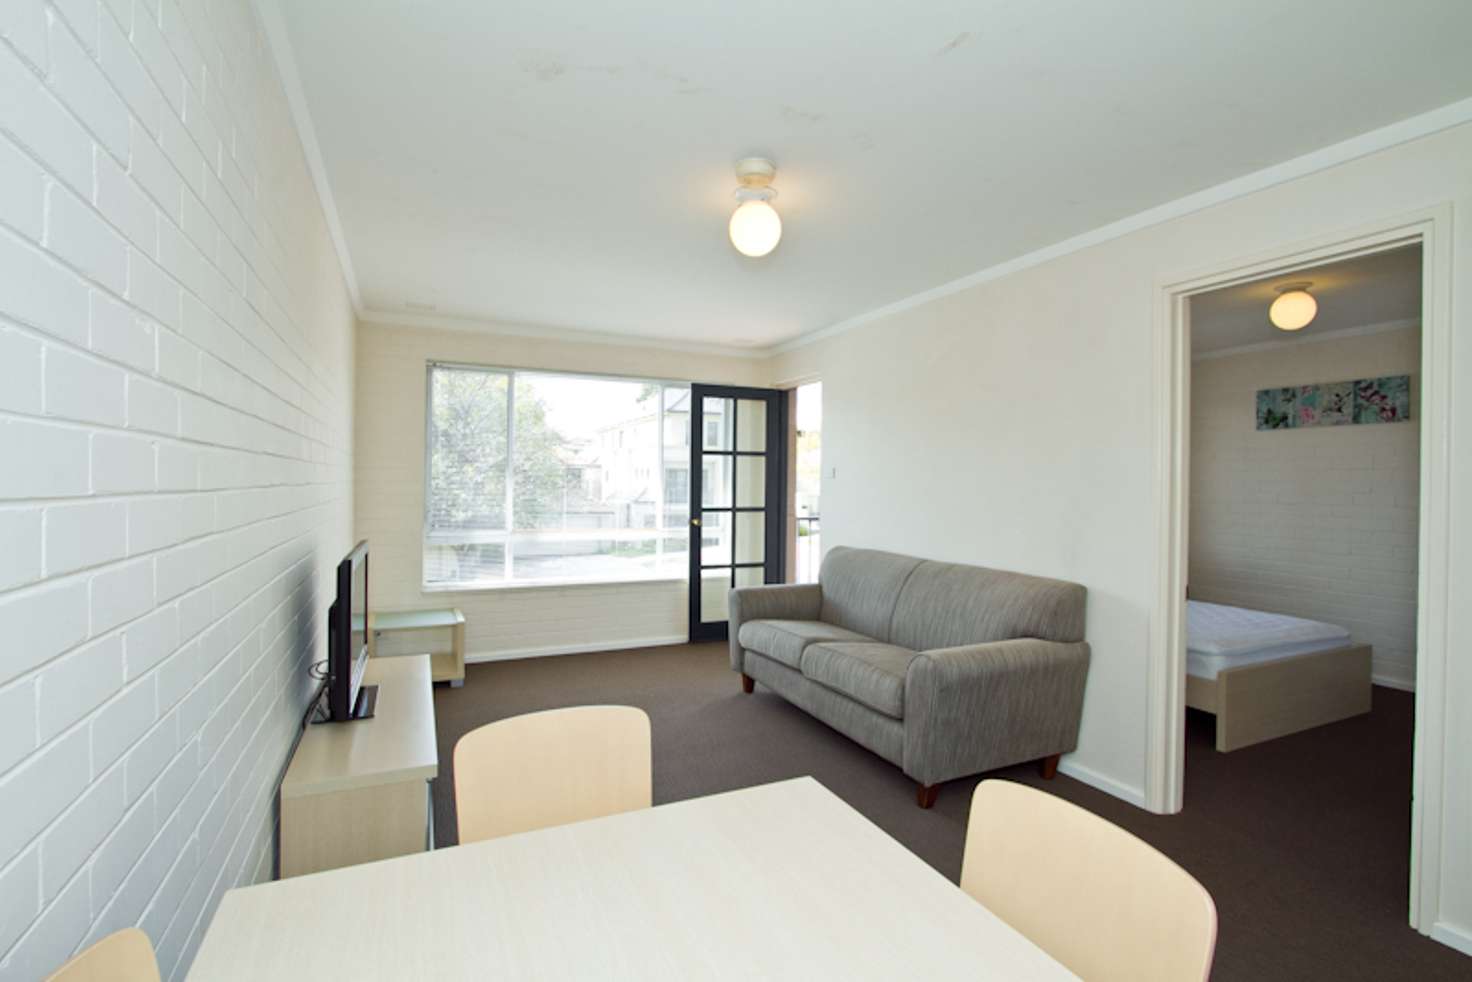 Main view of Homely apartment listing, 16/28 Onslow Street, South Perth WA 6151